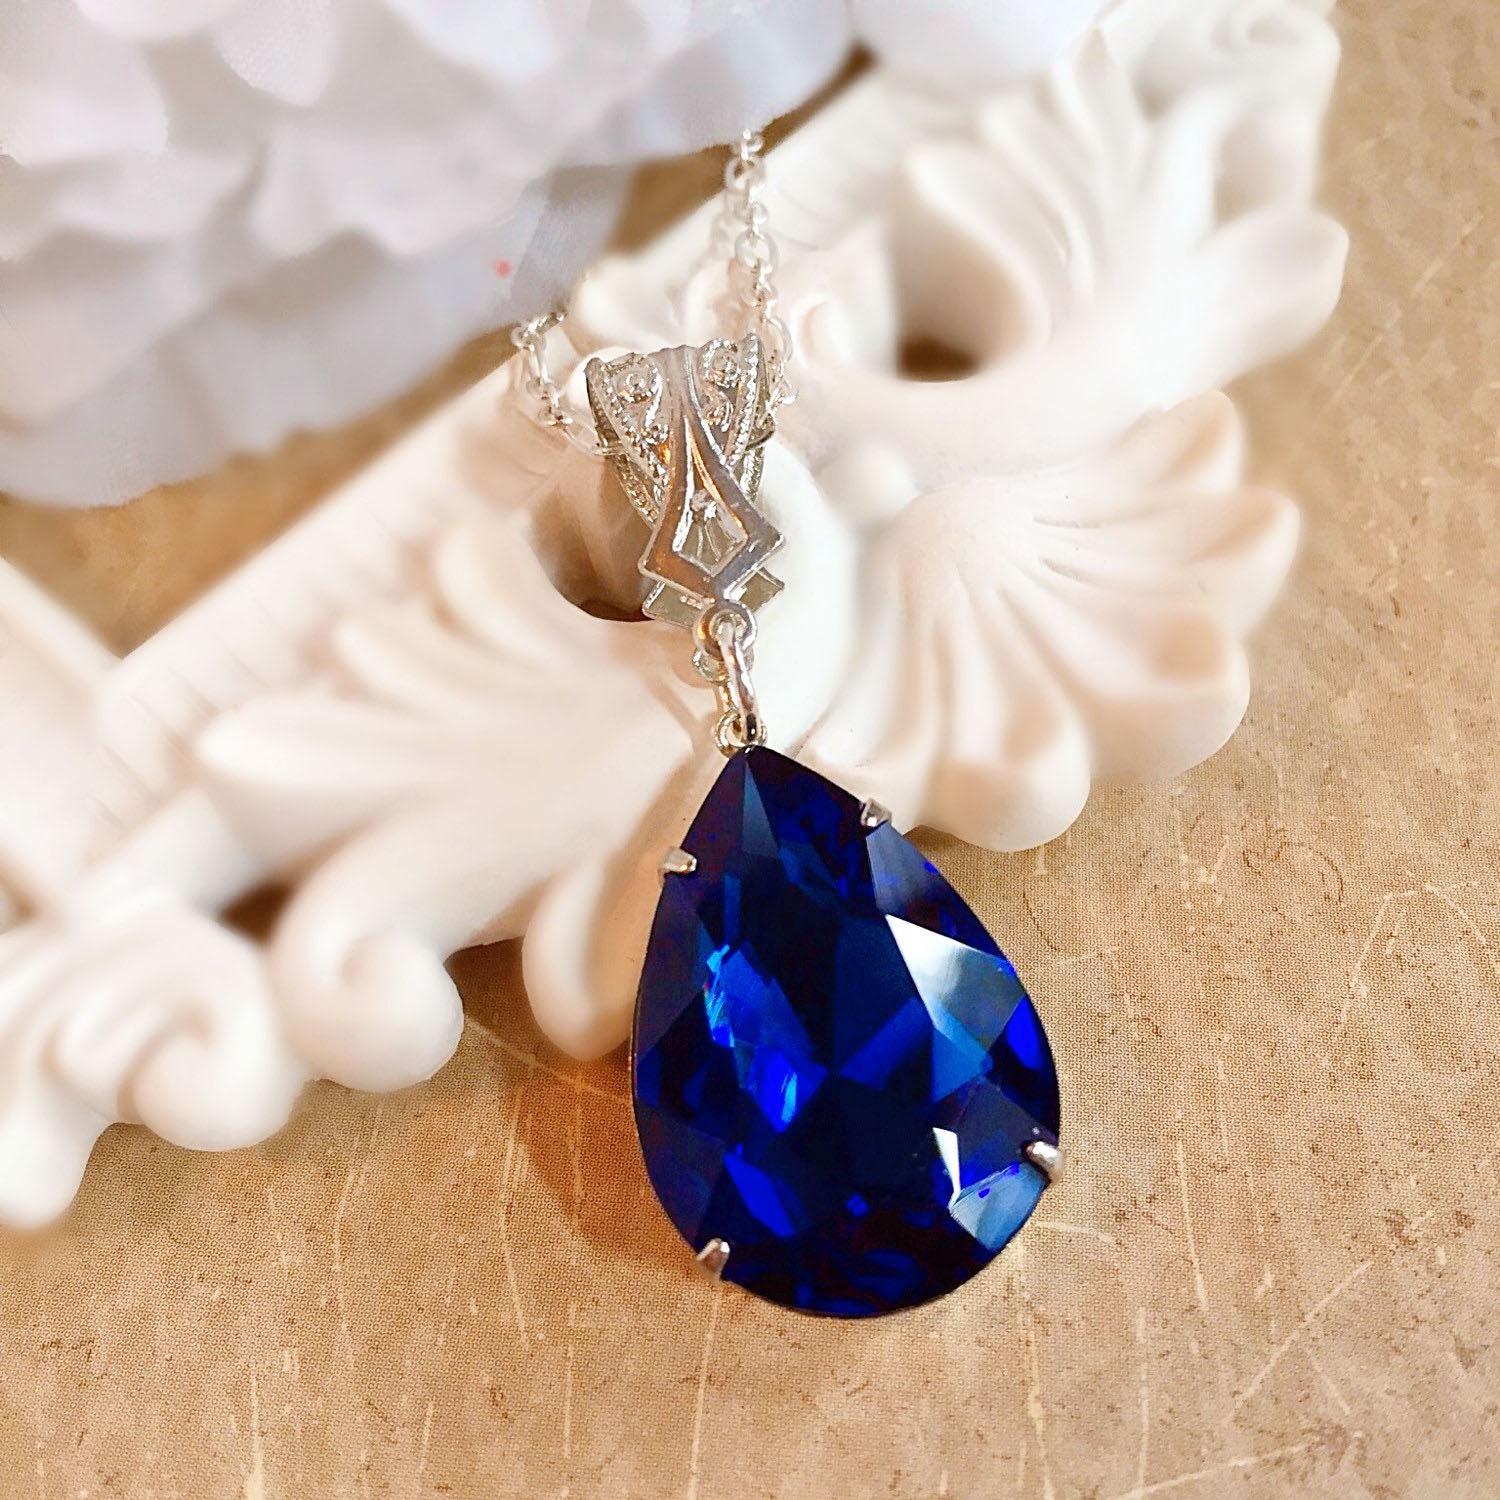 Art Deco Jewelry - Jewelry Gift - Sapphire Blue Necklace - VERSAILLES Sapphire